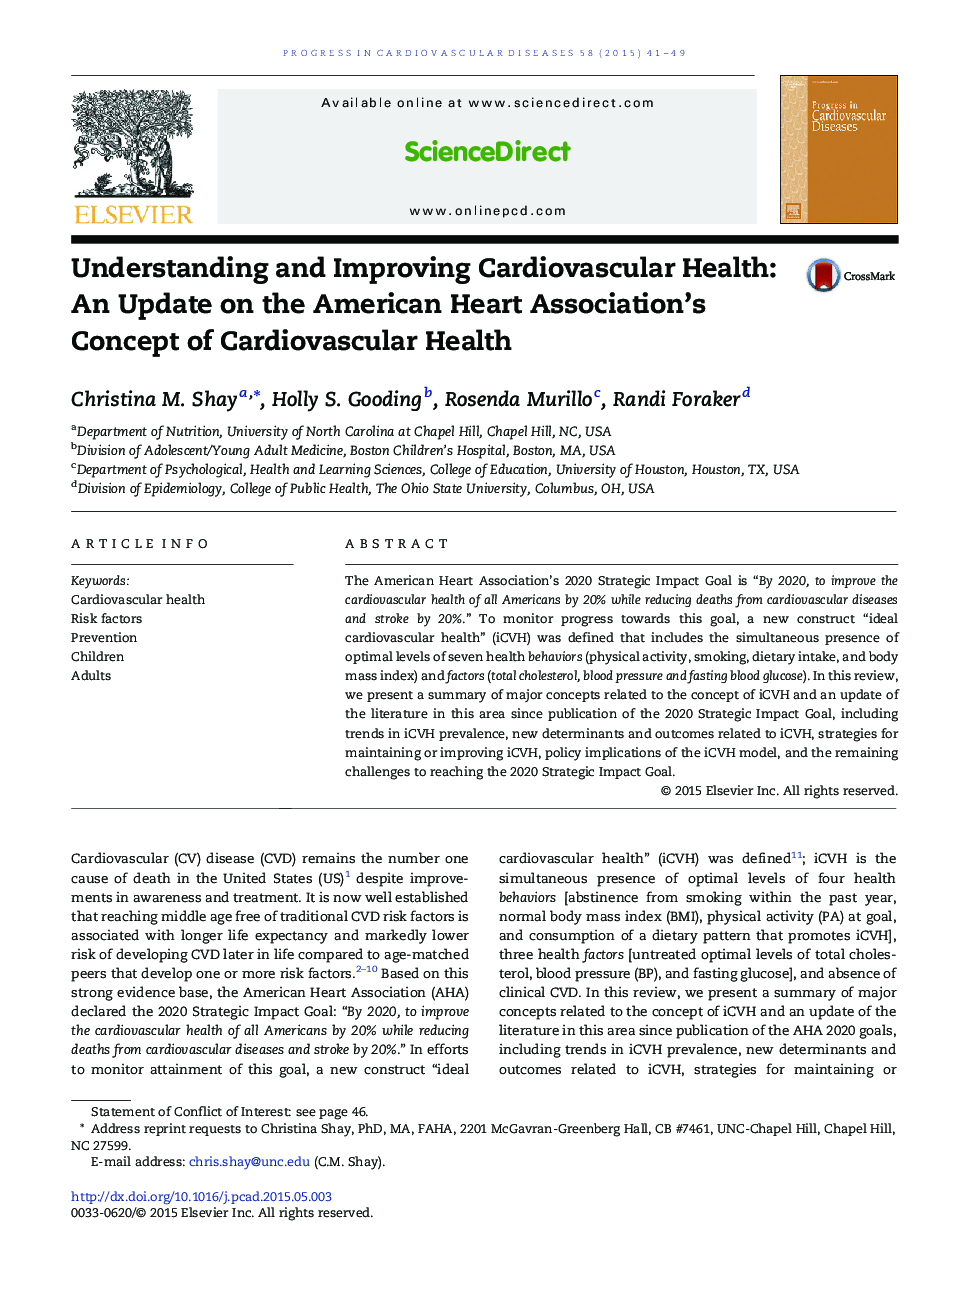 Understanding and Improving Cardiovascular Health: An Update on the American Heart Association's Concept of Cardiovascular Health 